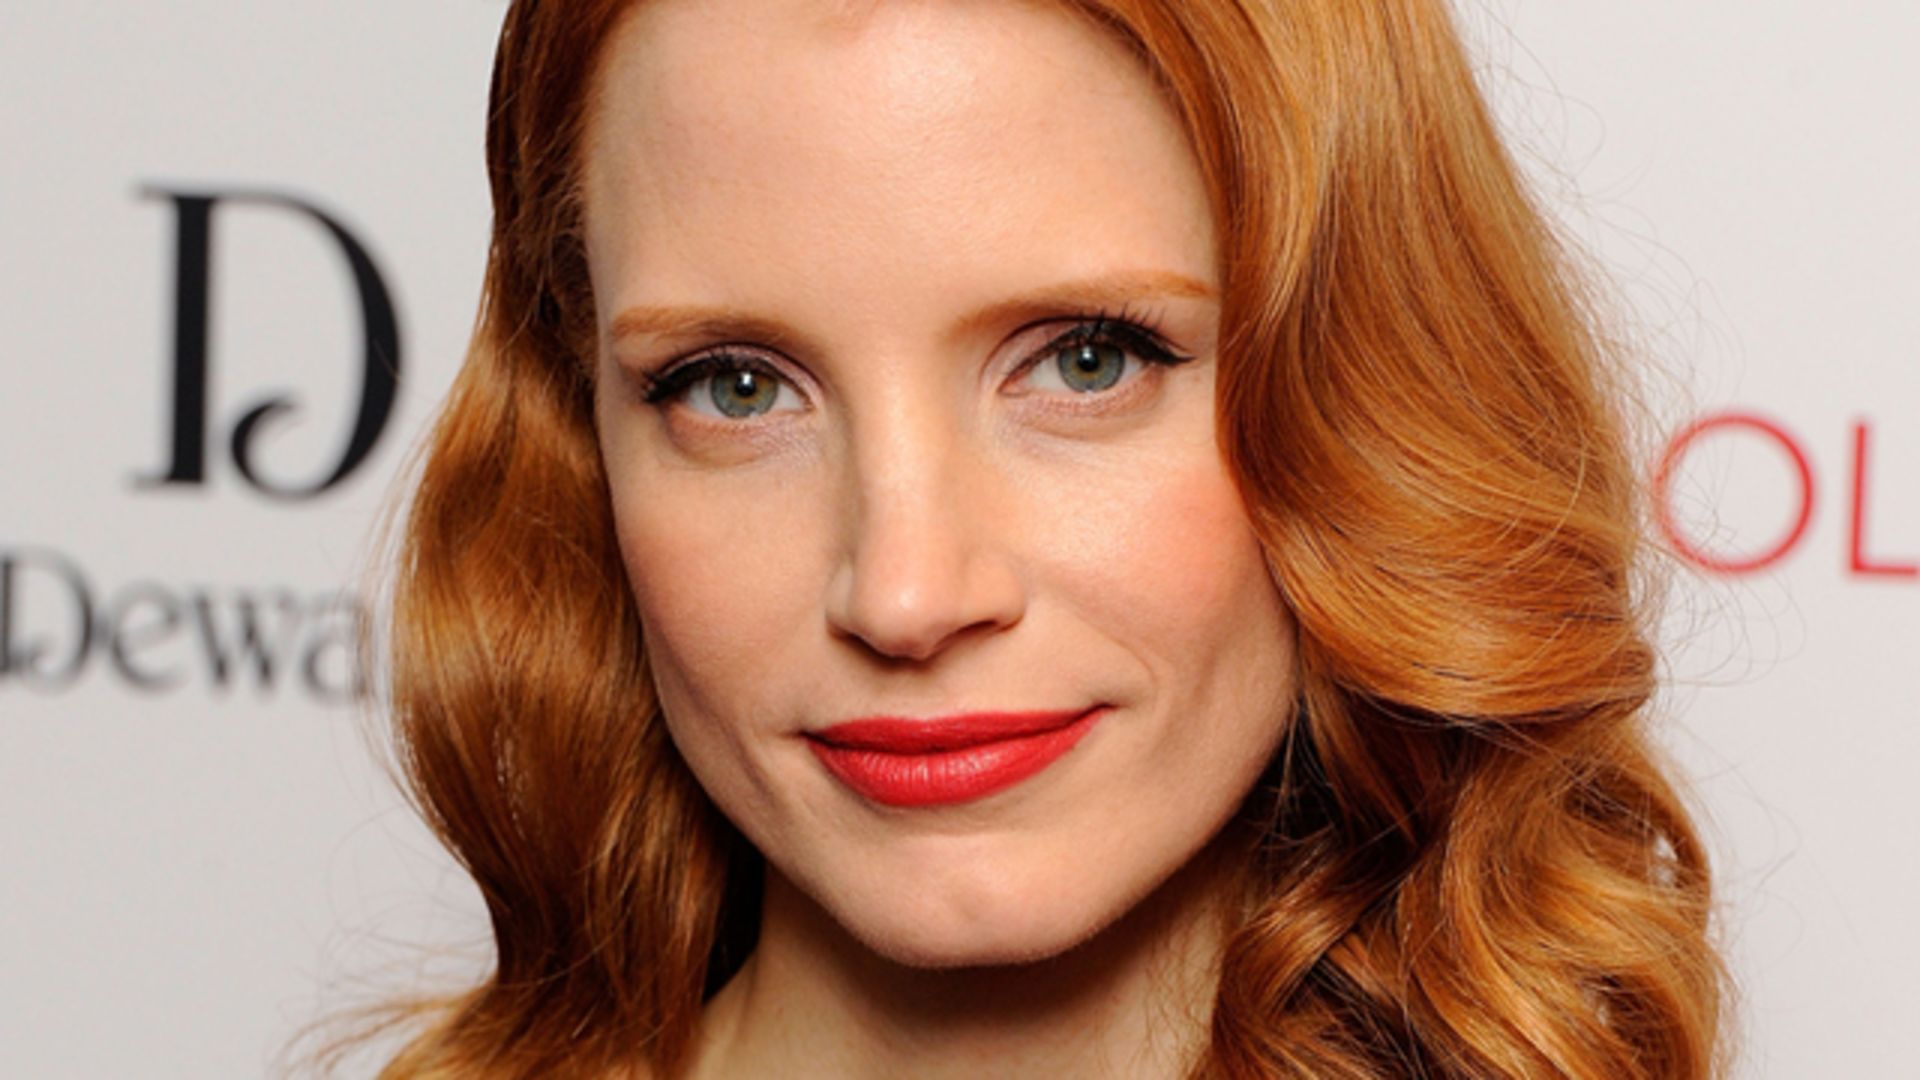 She s wearing her red. Jessica Michelle Chastain.